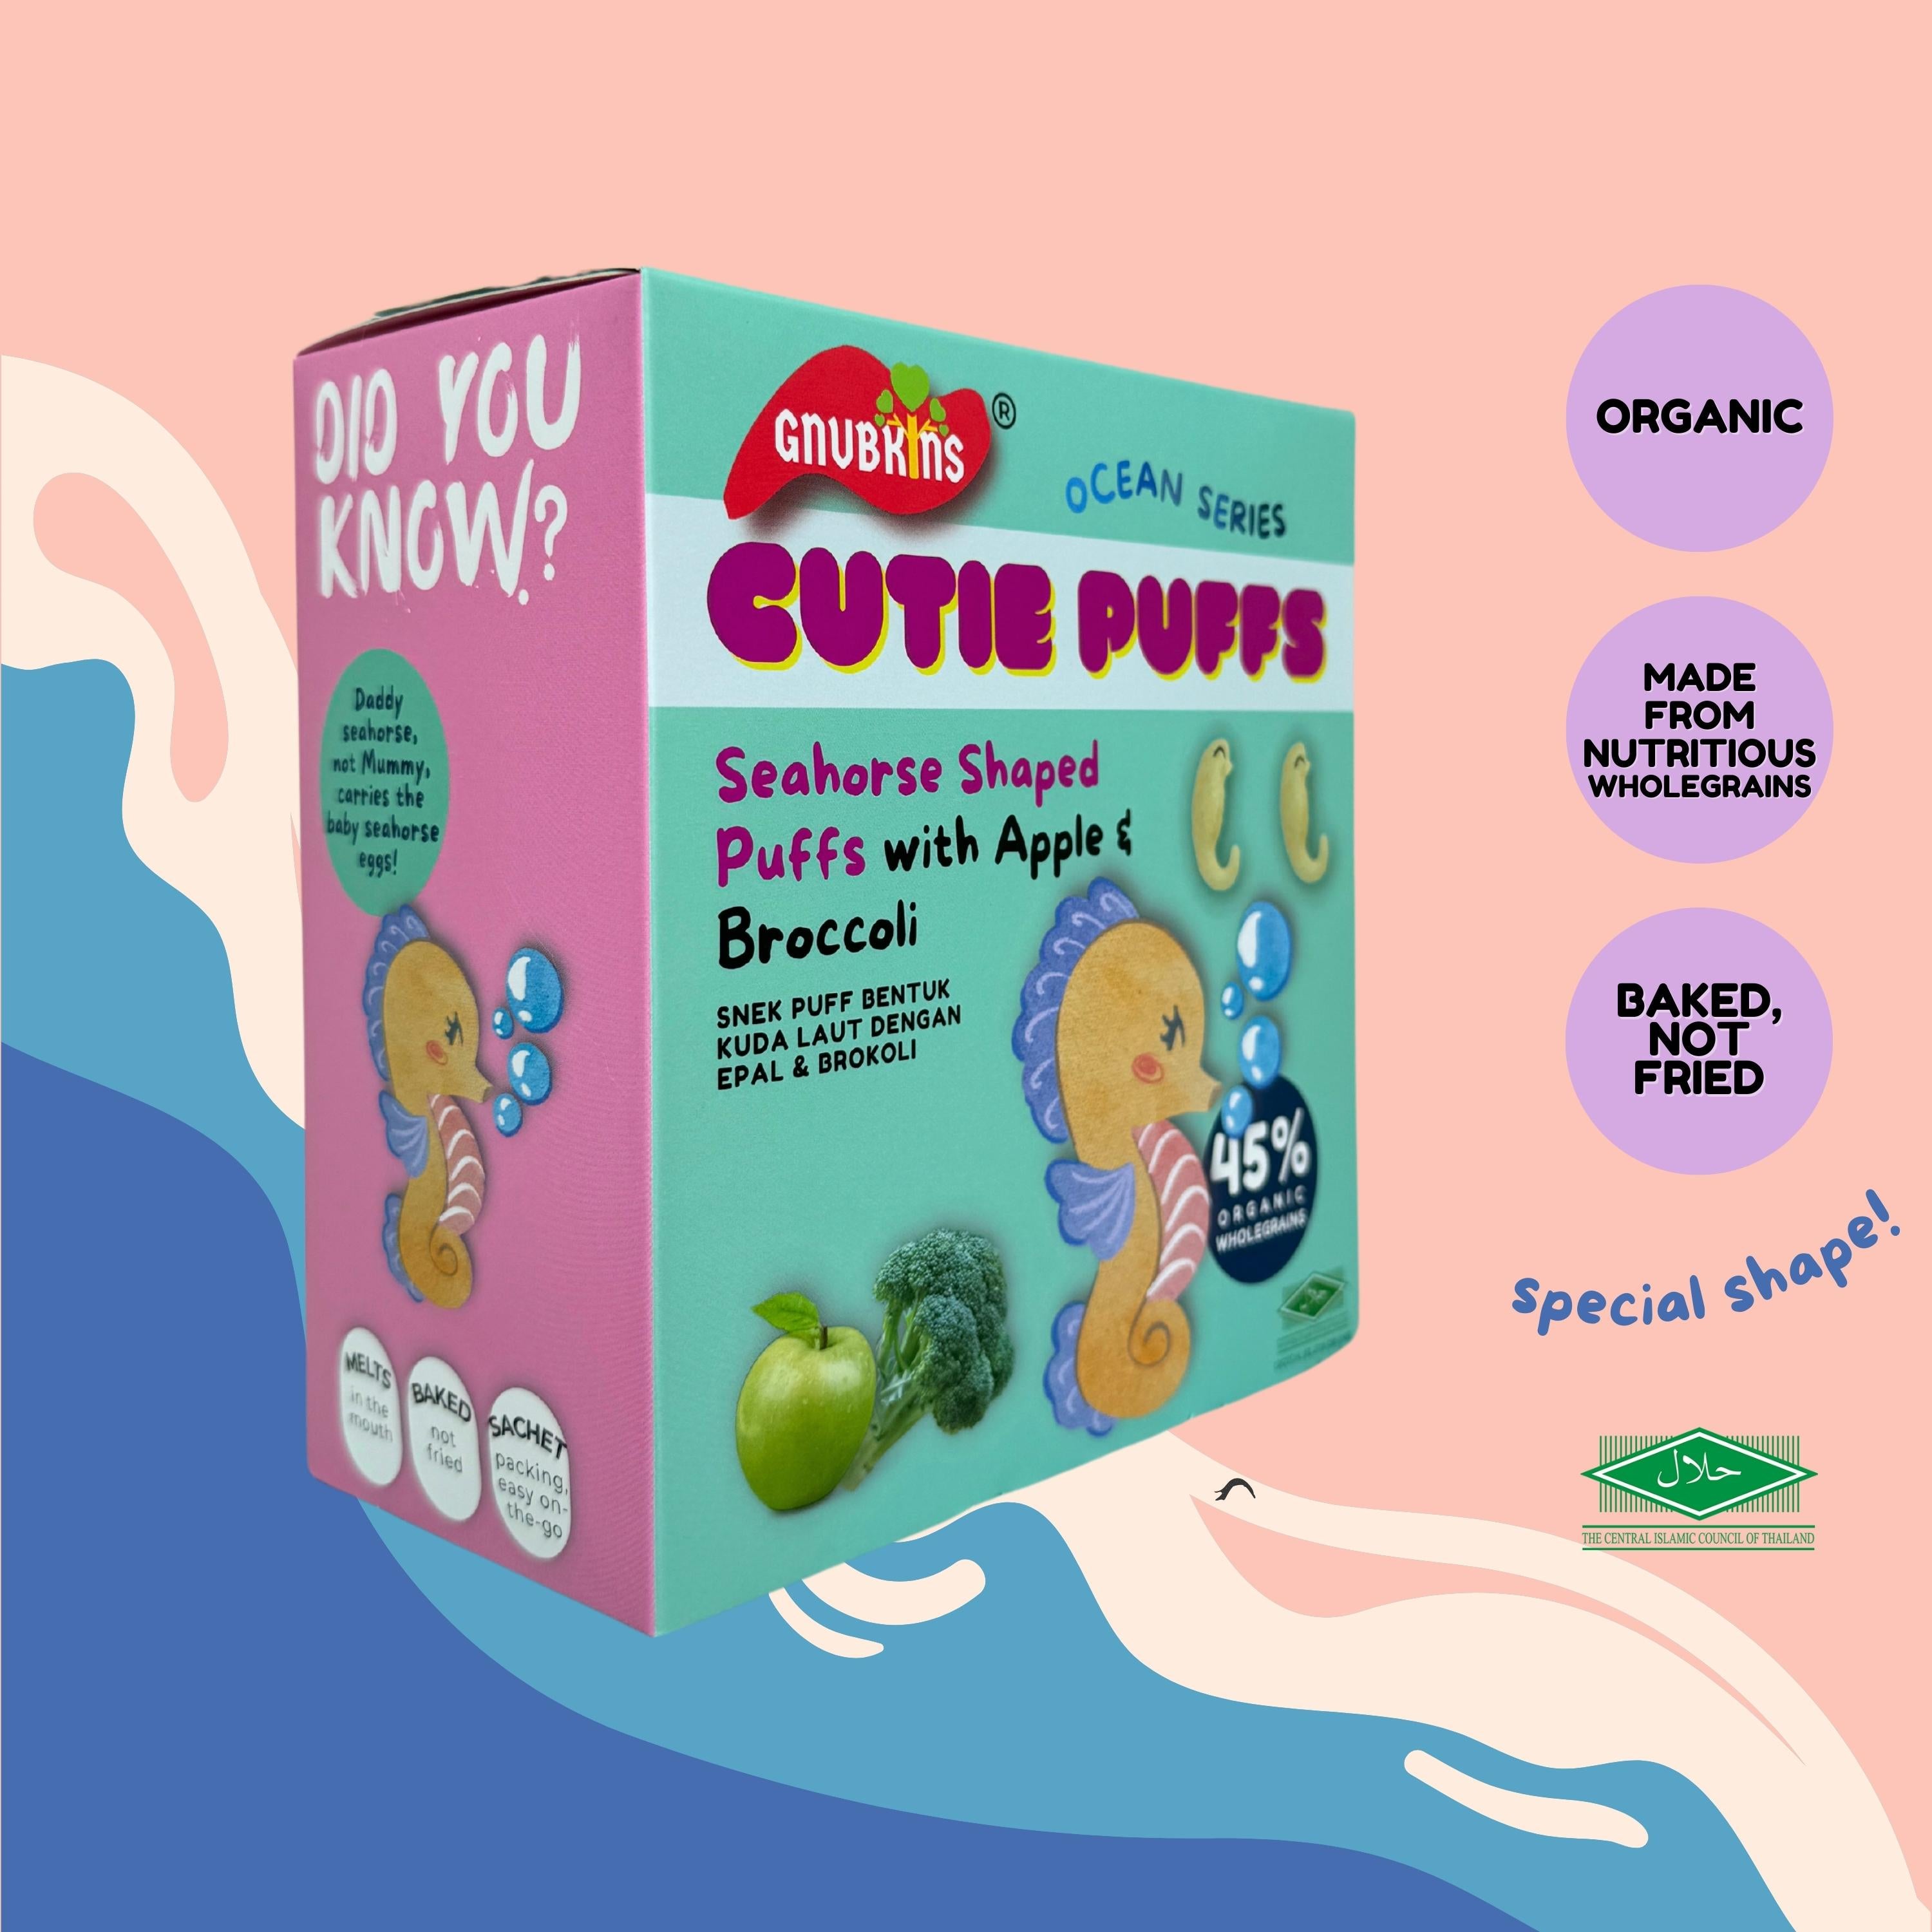 Organic Seahorse Shaped Puffs with Apple & Broccoli